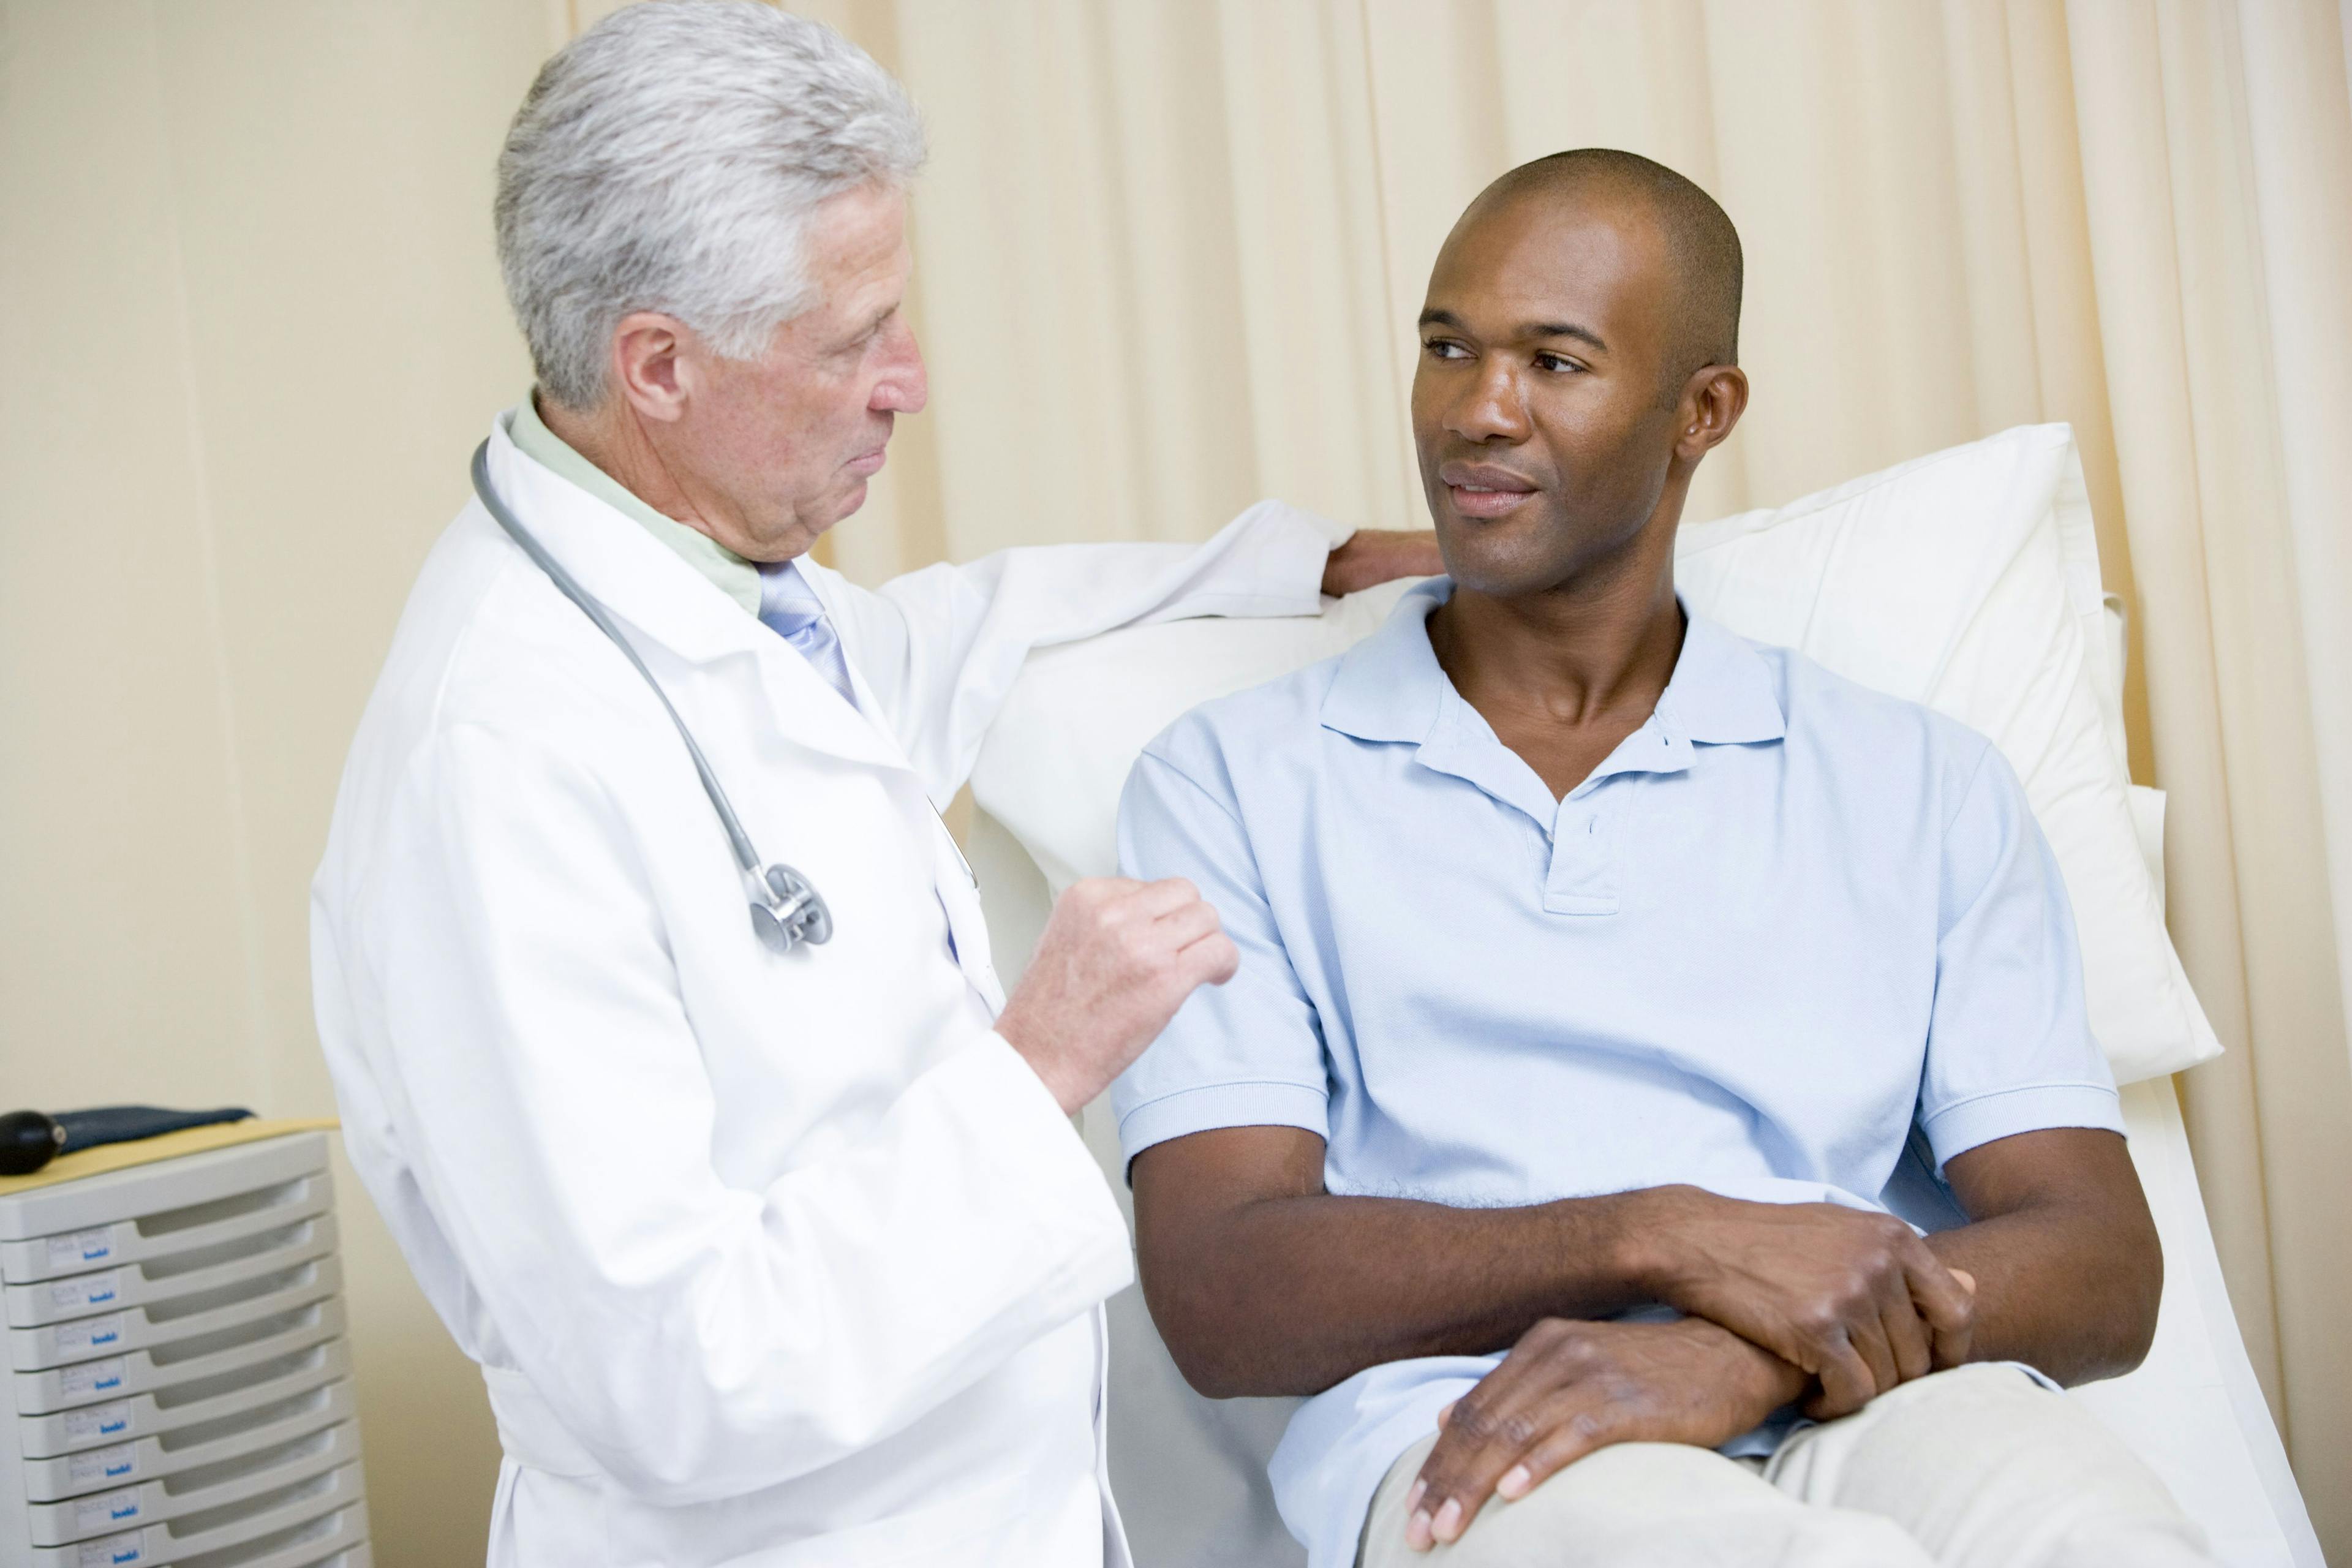 Men With Prostate Cancer After Surgery May Benefit From Shorter Duration of Radiation Therapy